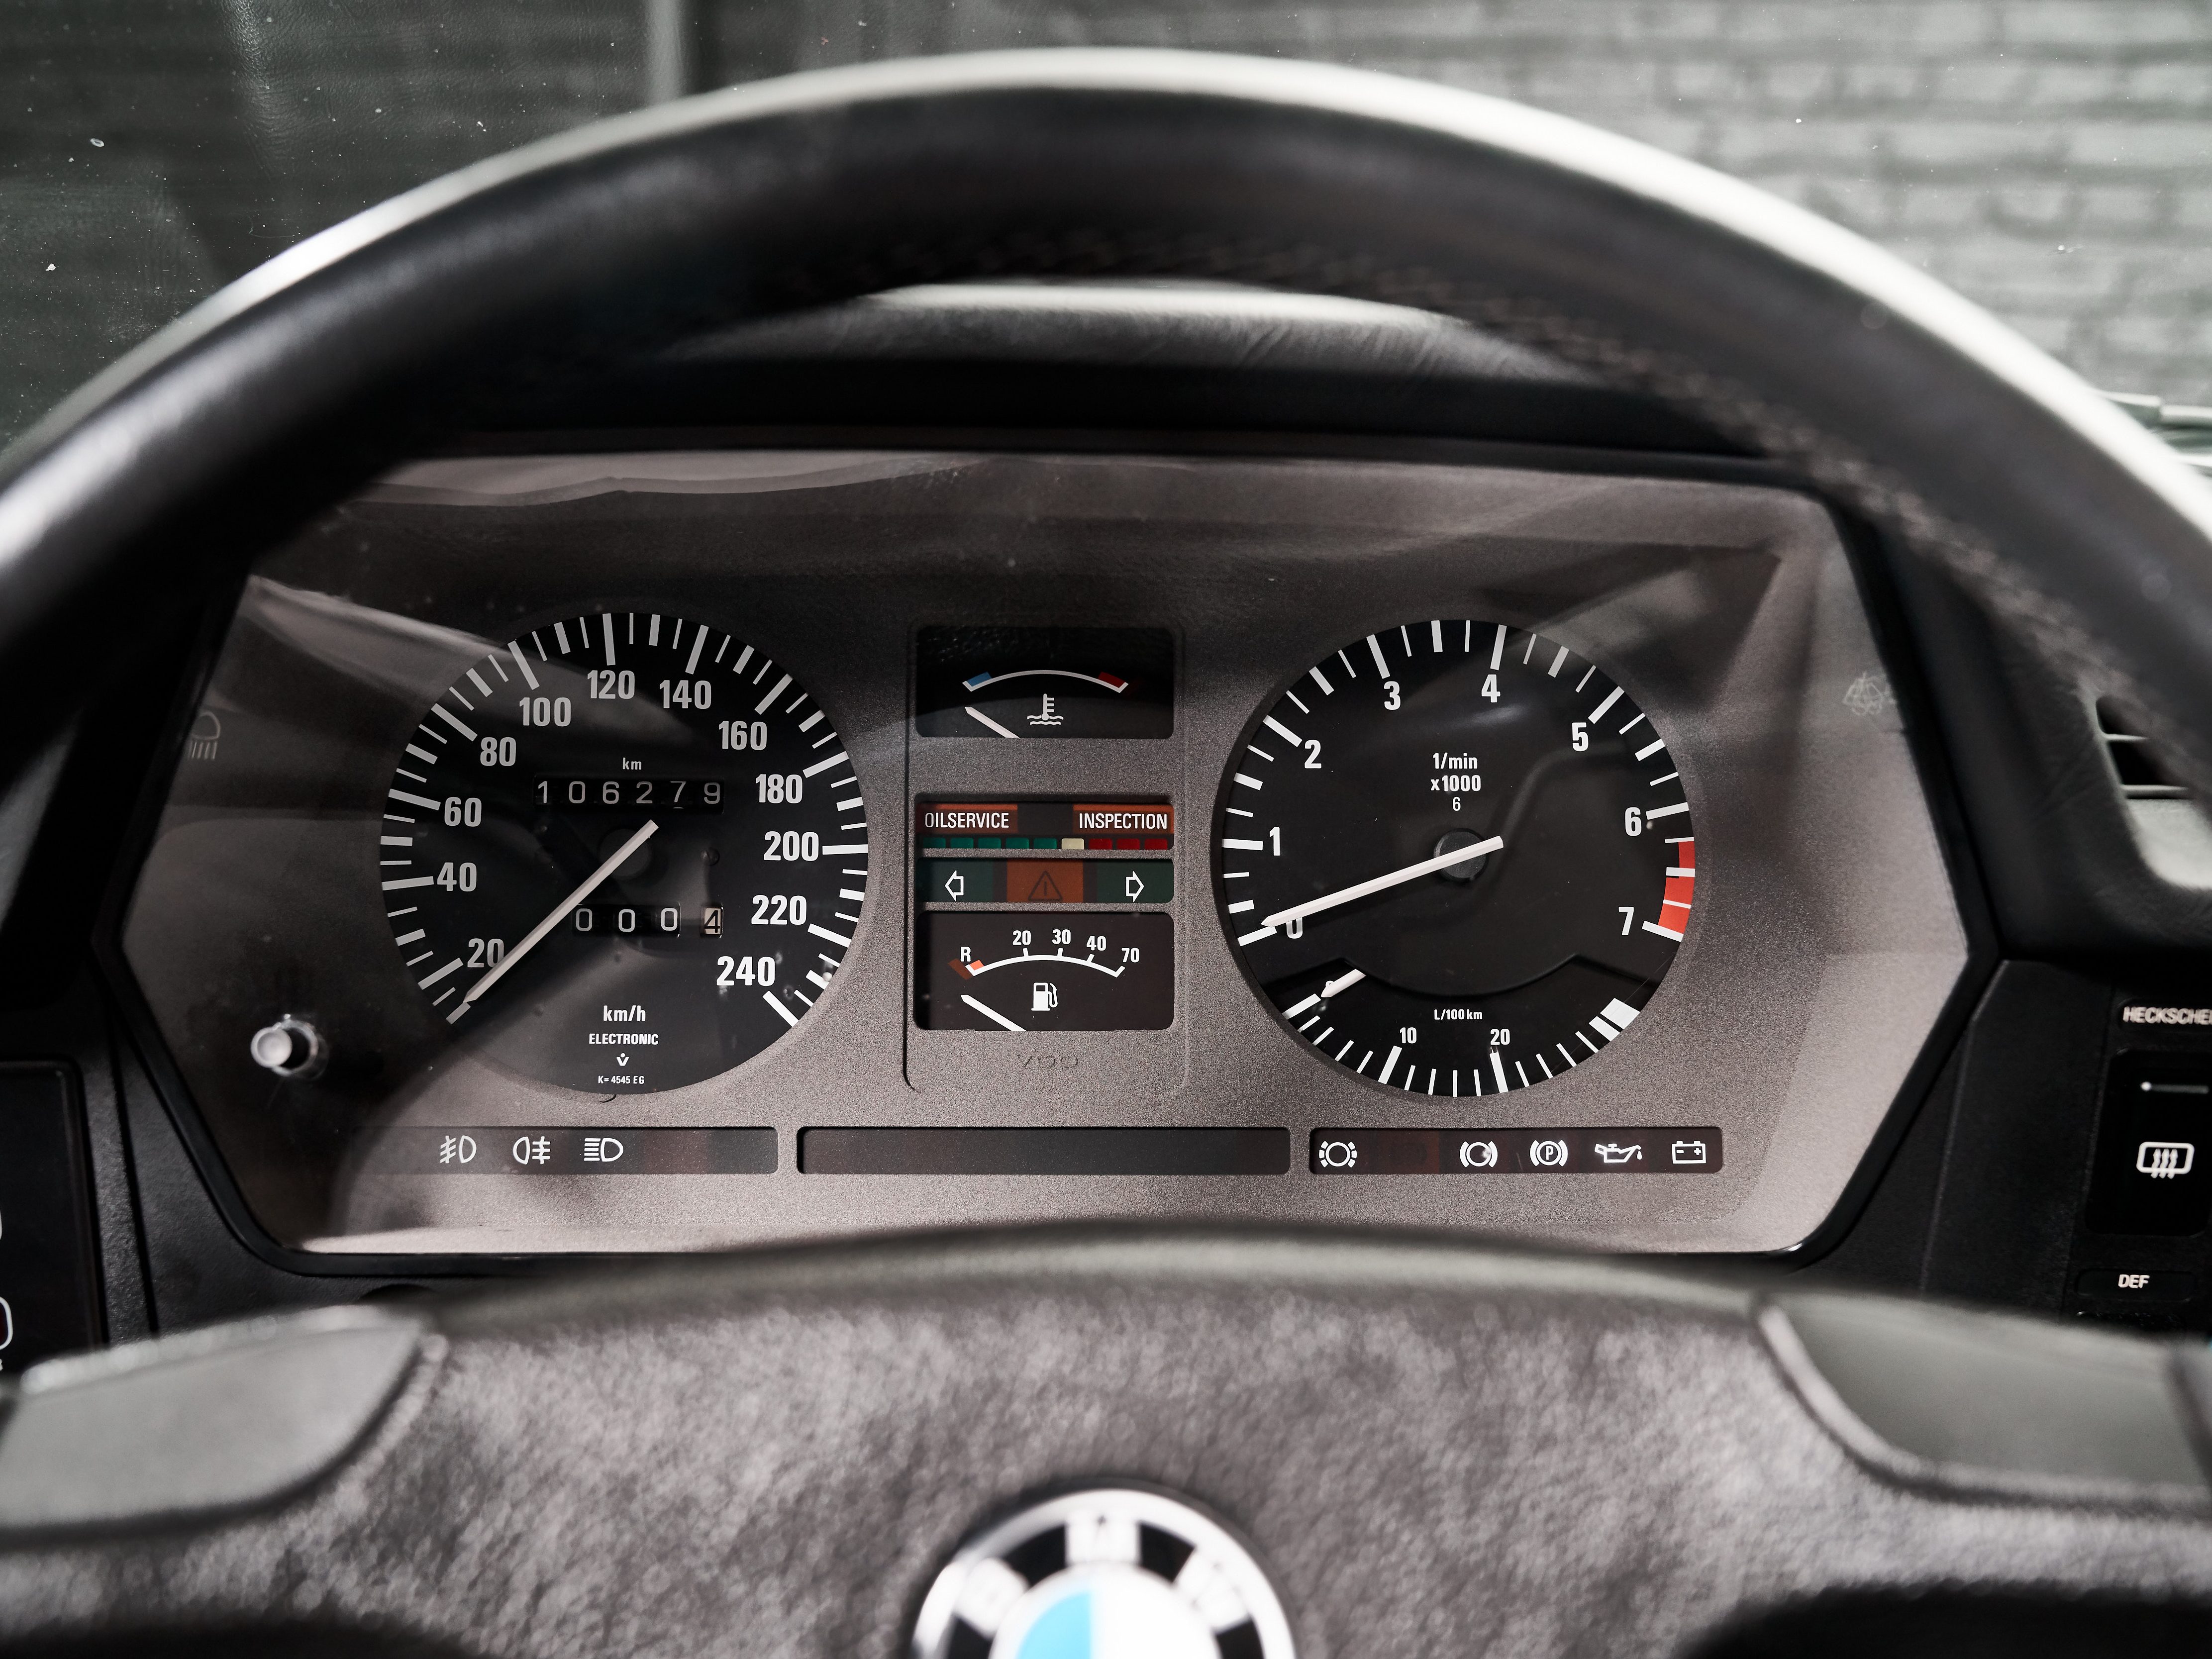 photo of a 1983 BMW 635 CSI for sale by Classic 42 Classic German Car Dealer www.classic42.be